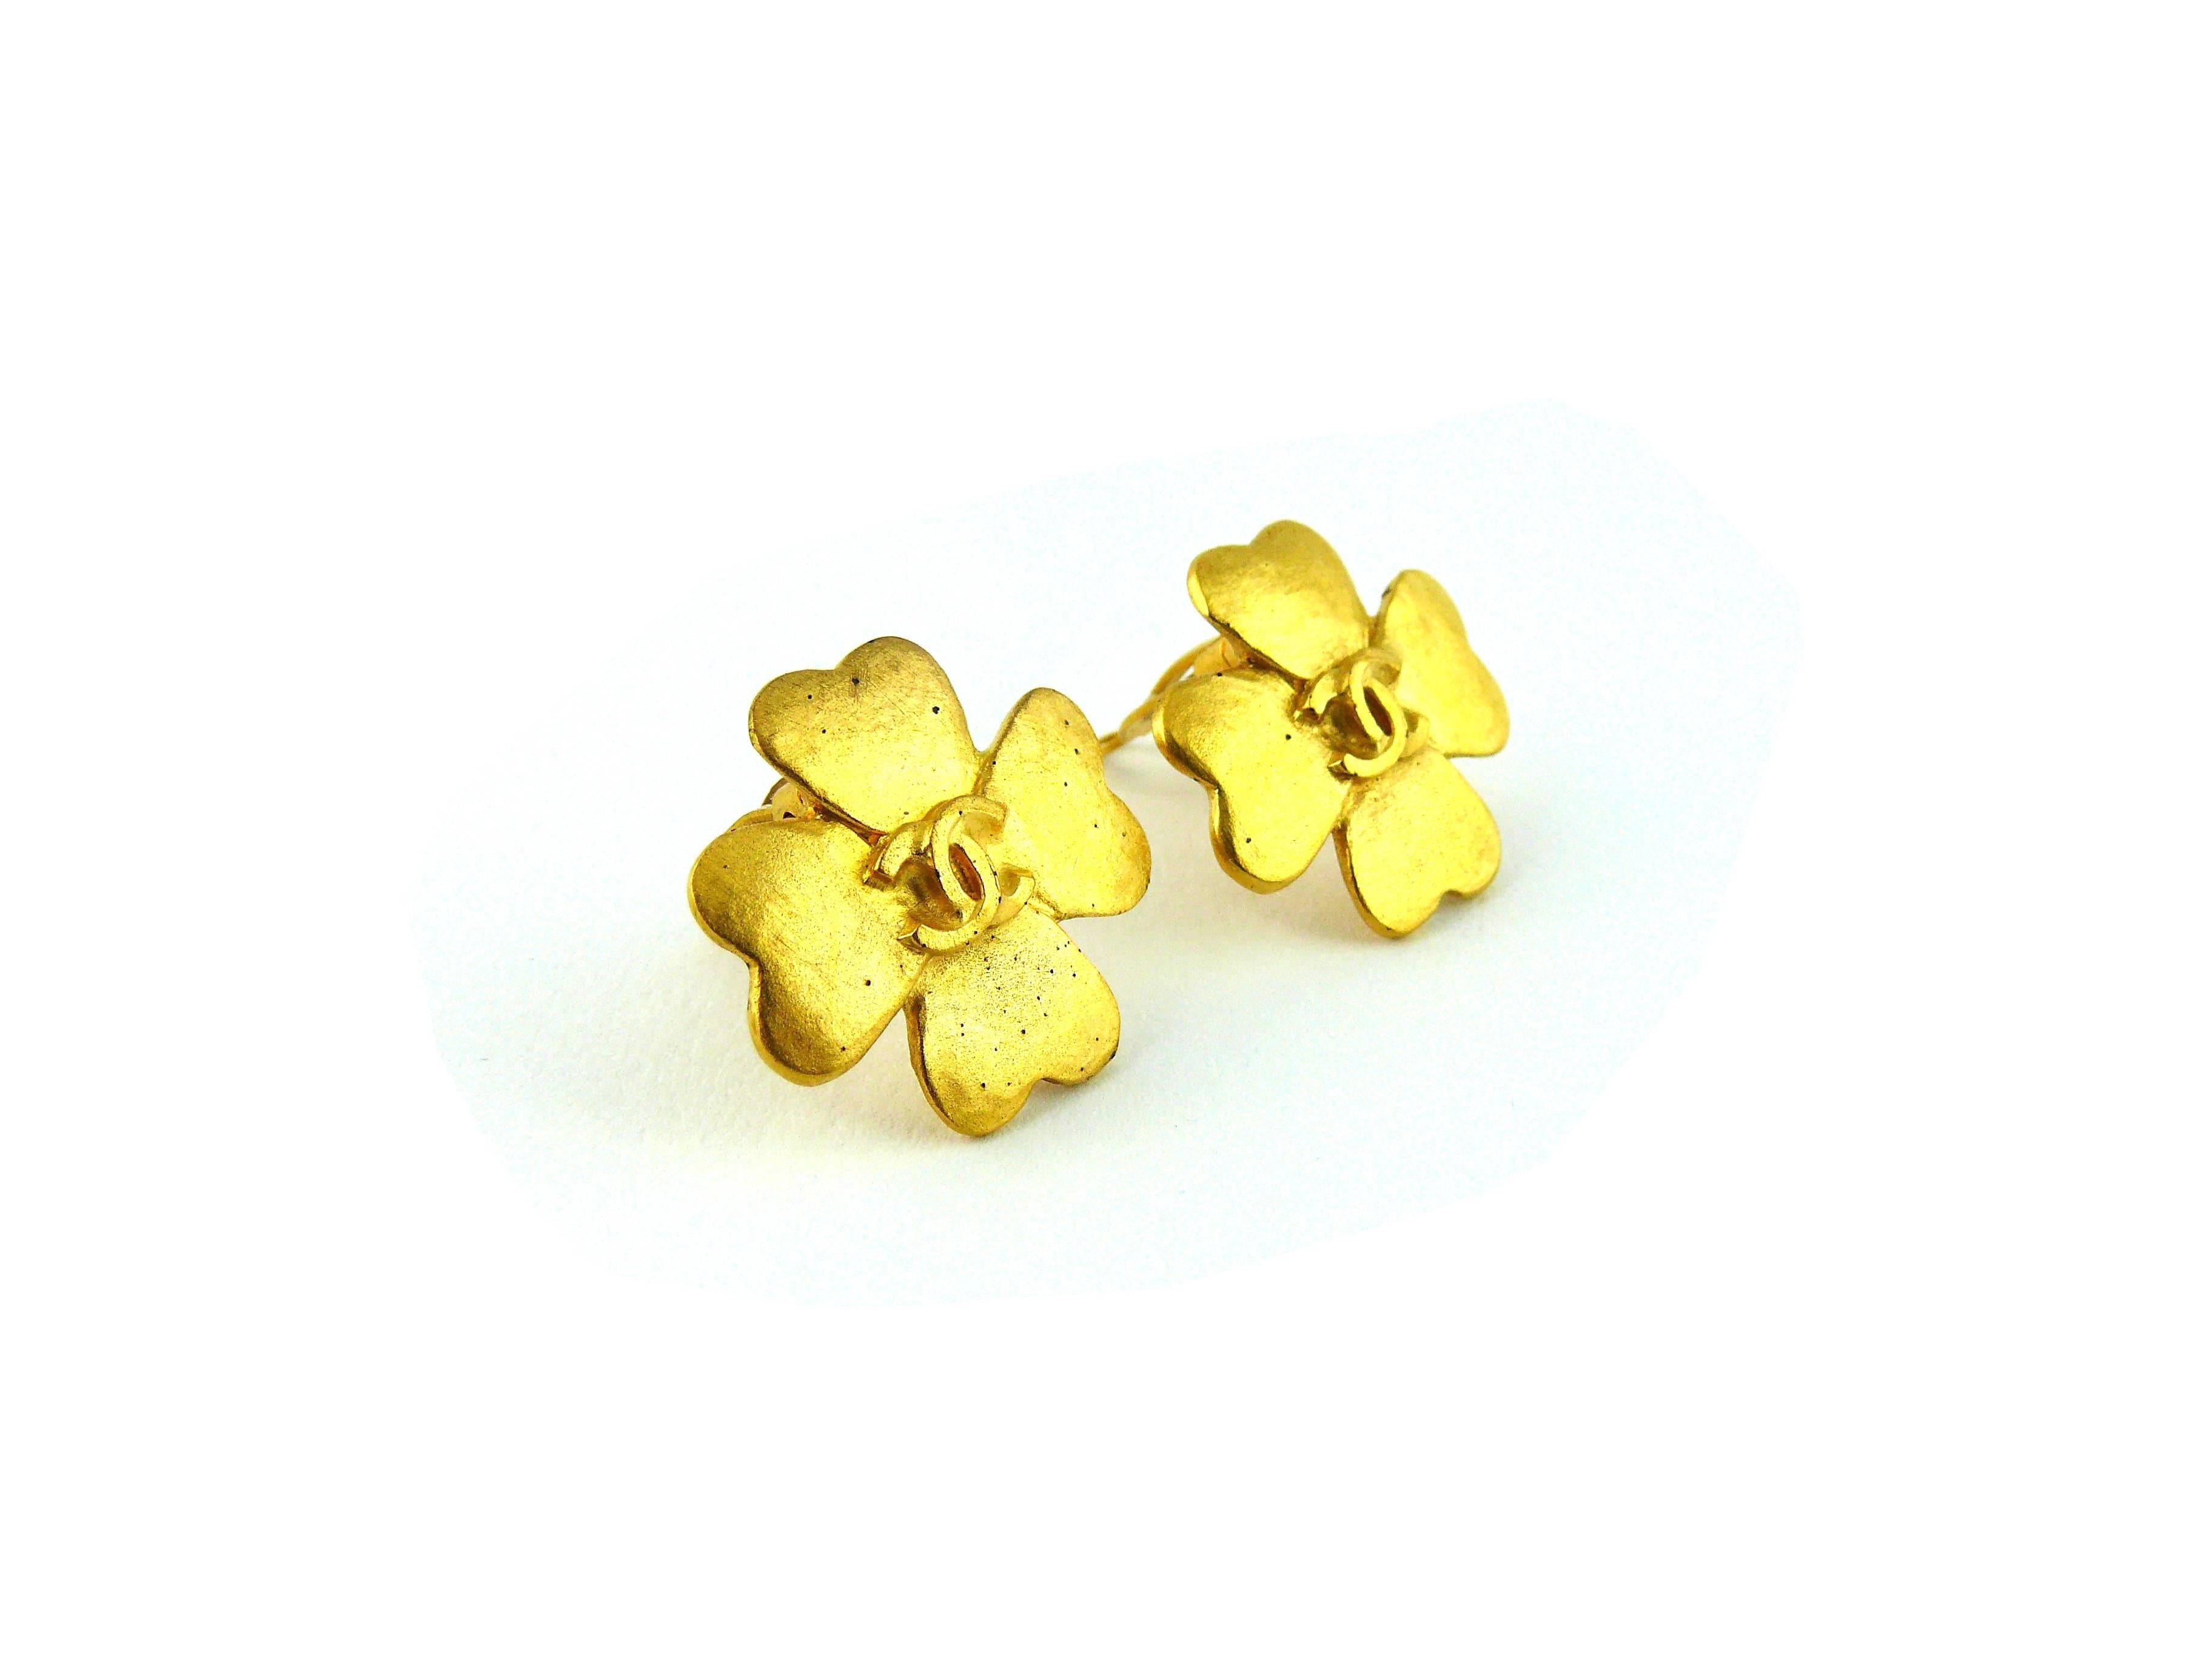 CHANEL vintage gold tone CC clover clip-on earrings.

Spring/Summer 1995 Spring.

Marked CHANEL 95 P Made in France.

JEWELRY CONDITION CHART
- New or never worn : item is in pristine condition with no noticeable imperfections
- Excellent :